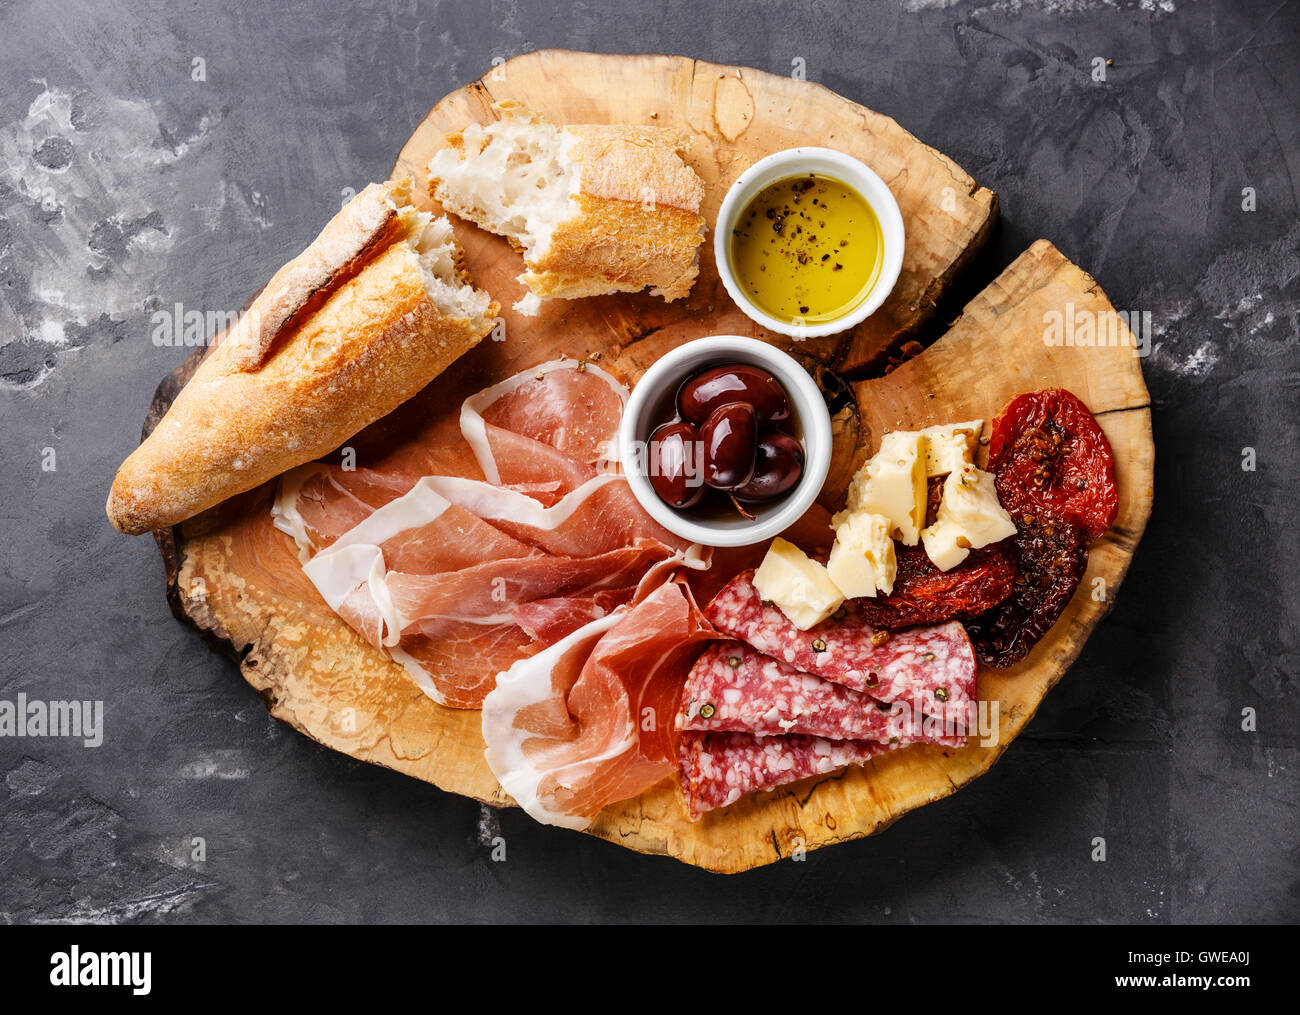 Cold meat plate with prosciutto, salami, bread and olives on wooden board on gray concrete stone background Stock Photo